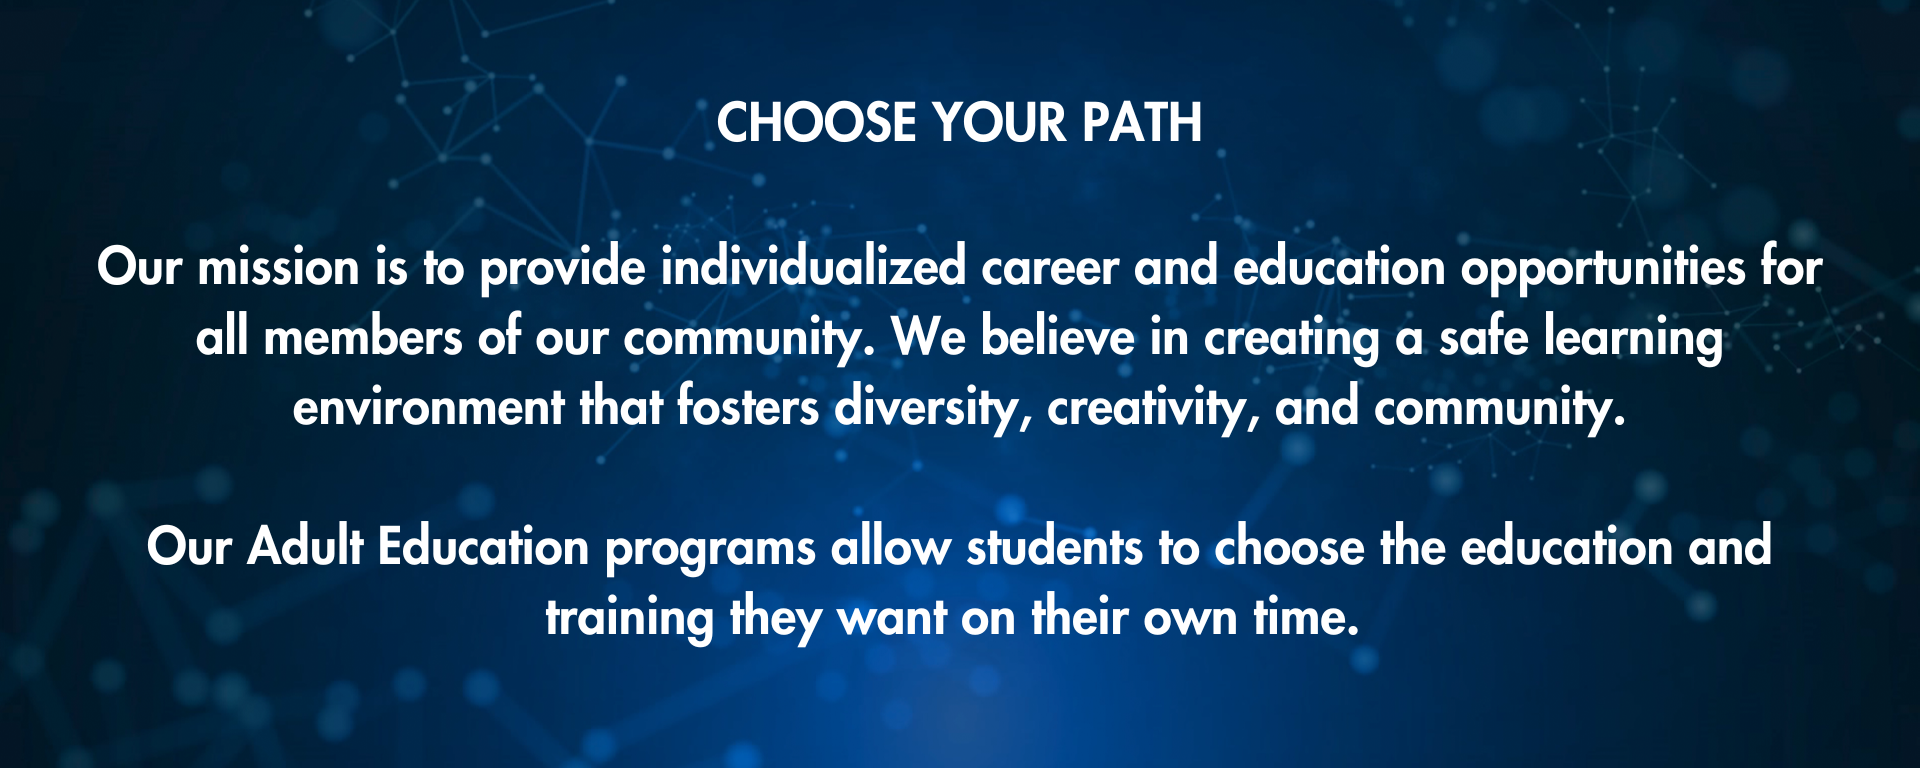 Choose your path: our mission is to provide individualized